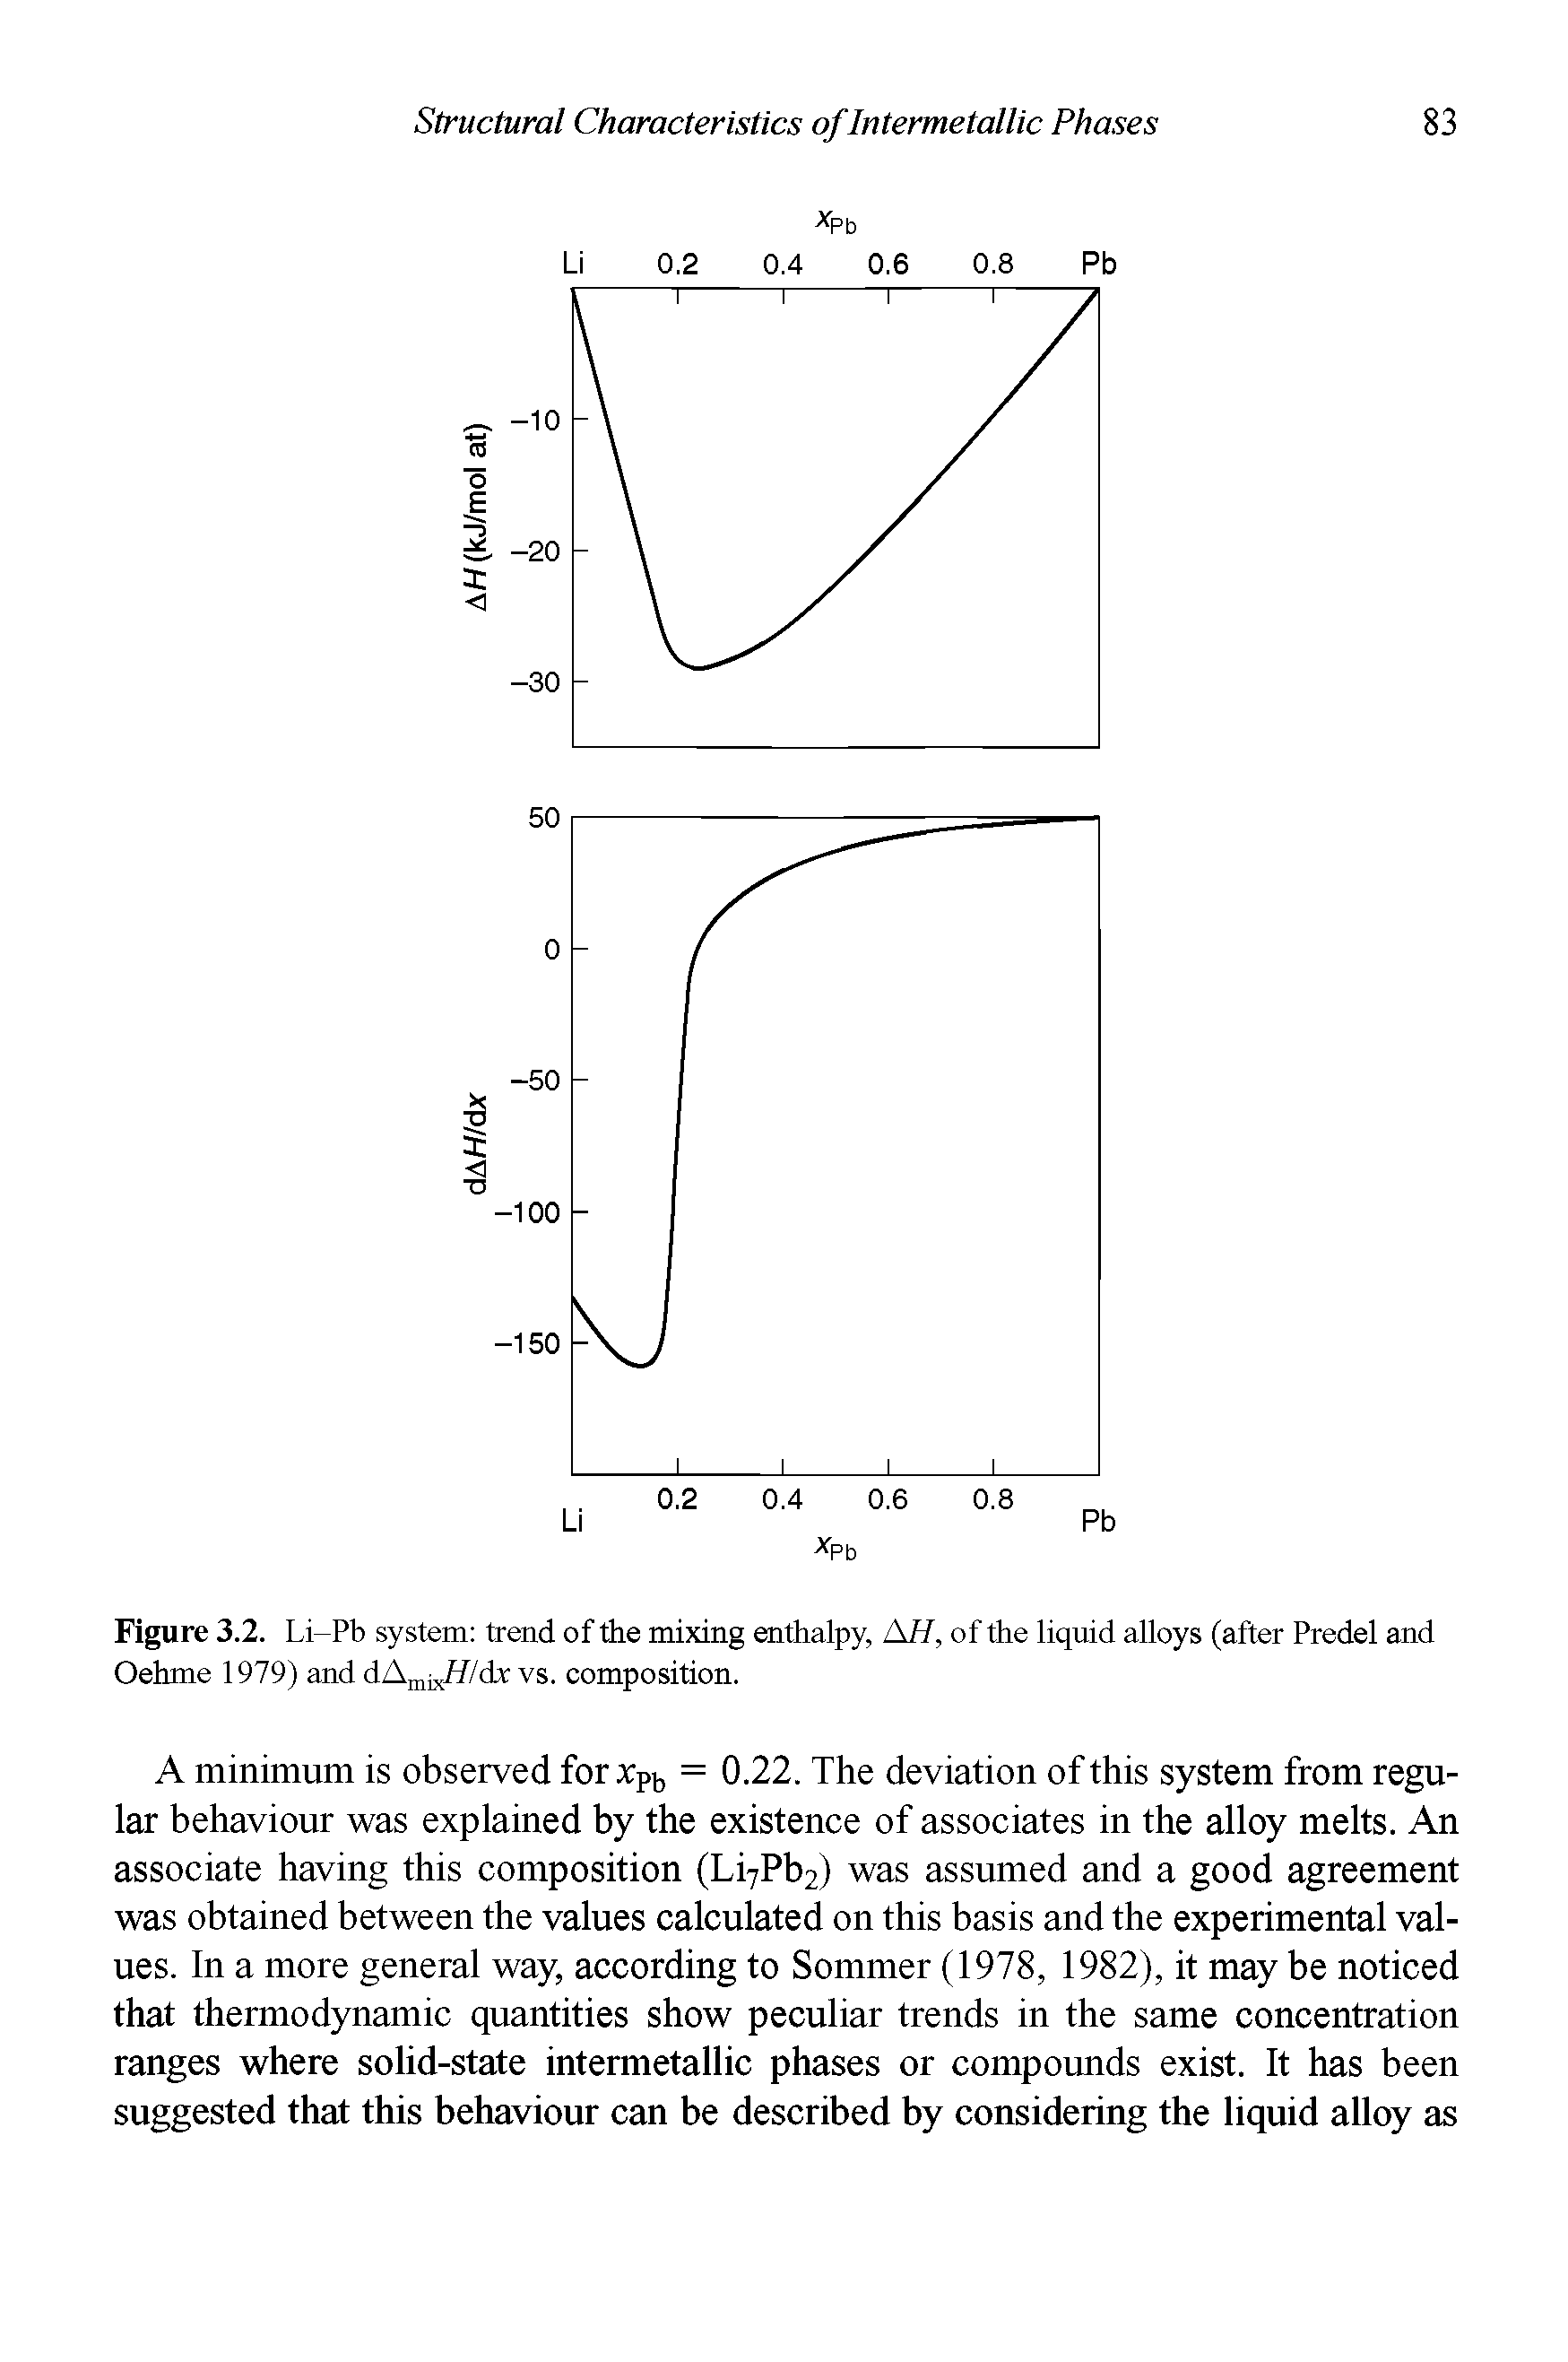 Figure 3.2. Li-Pb system trend of the mixing enthalpy, AH, of the liquid alloys (after Predel and Oehme 1979) and dAmixH/dx vs. composition.